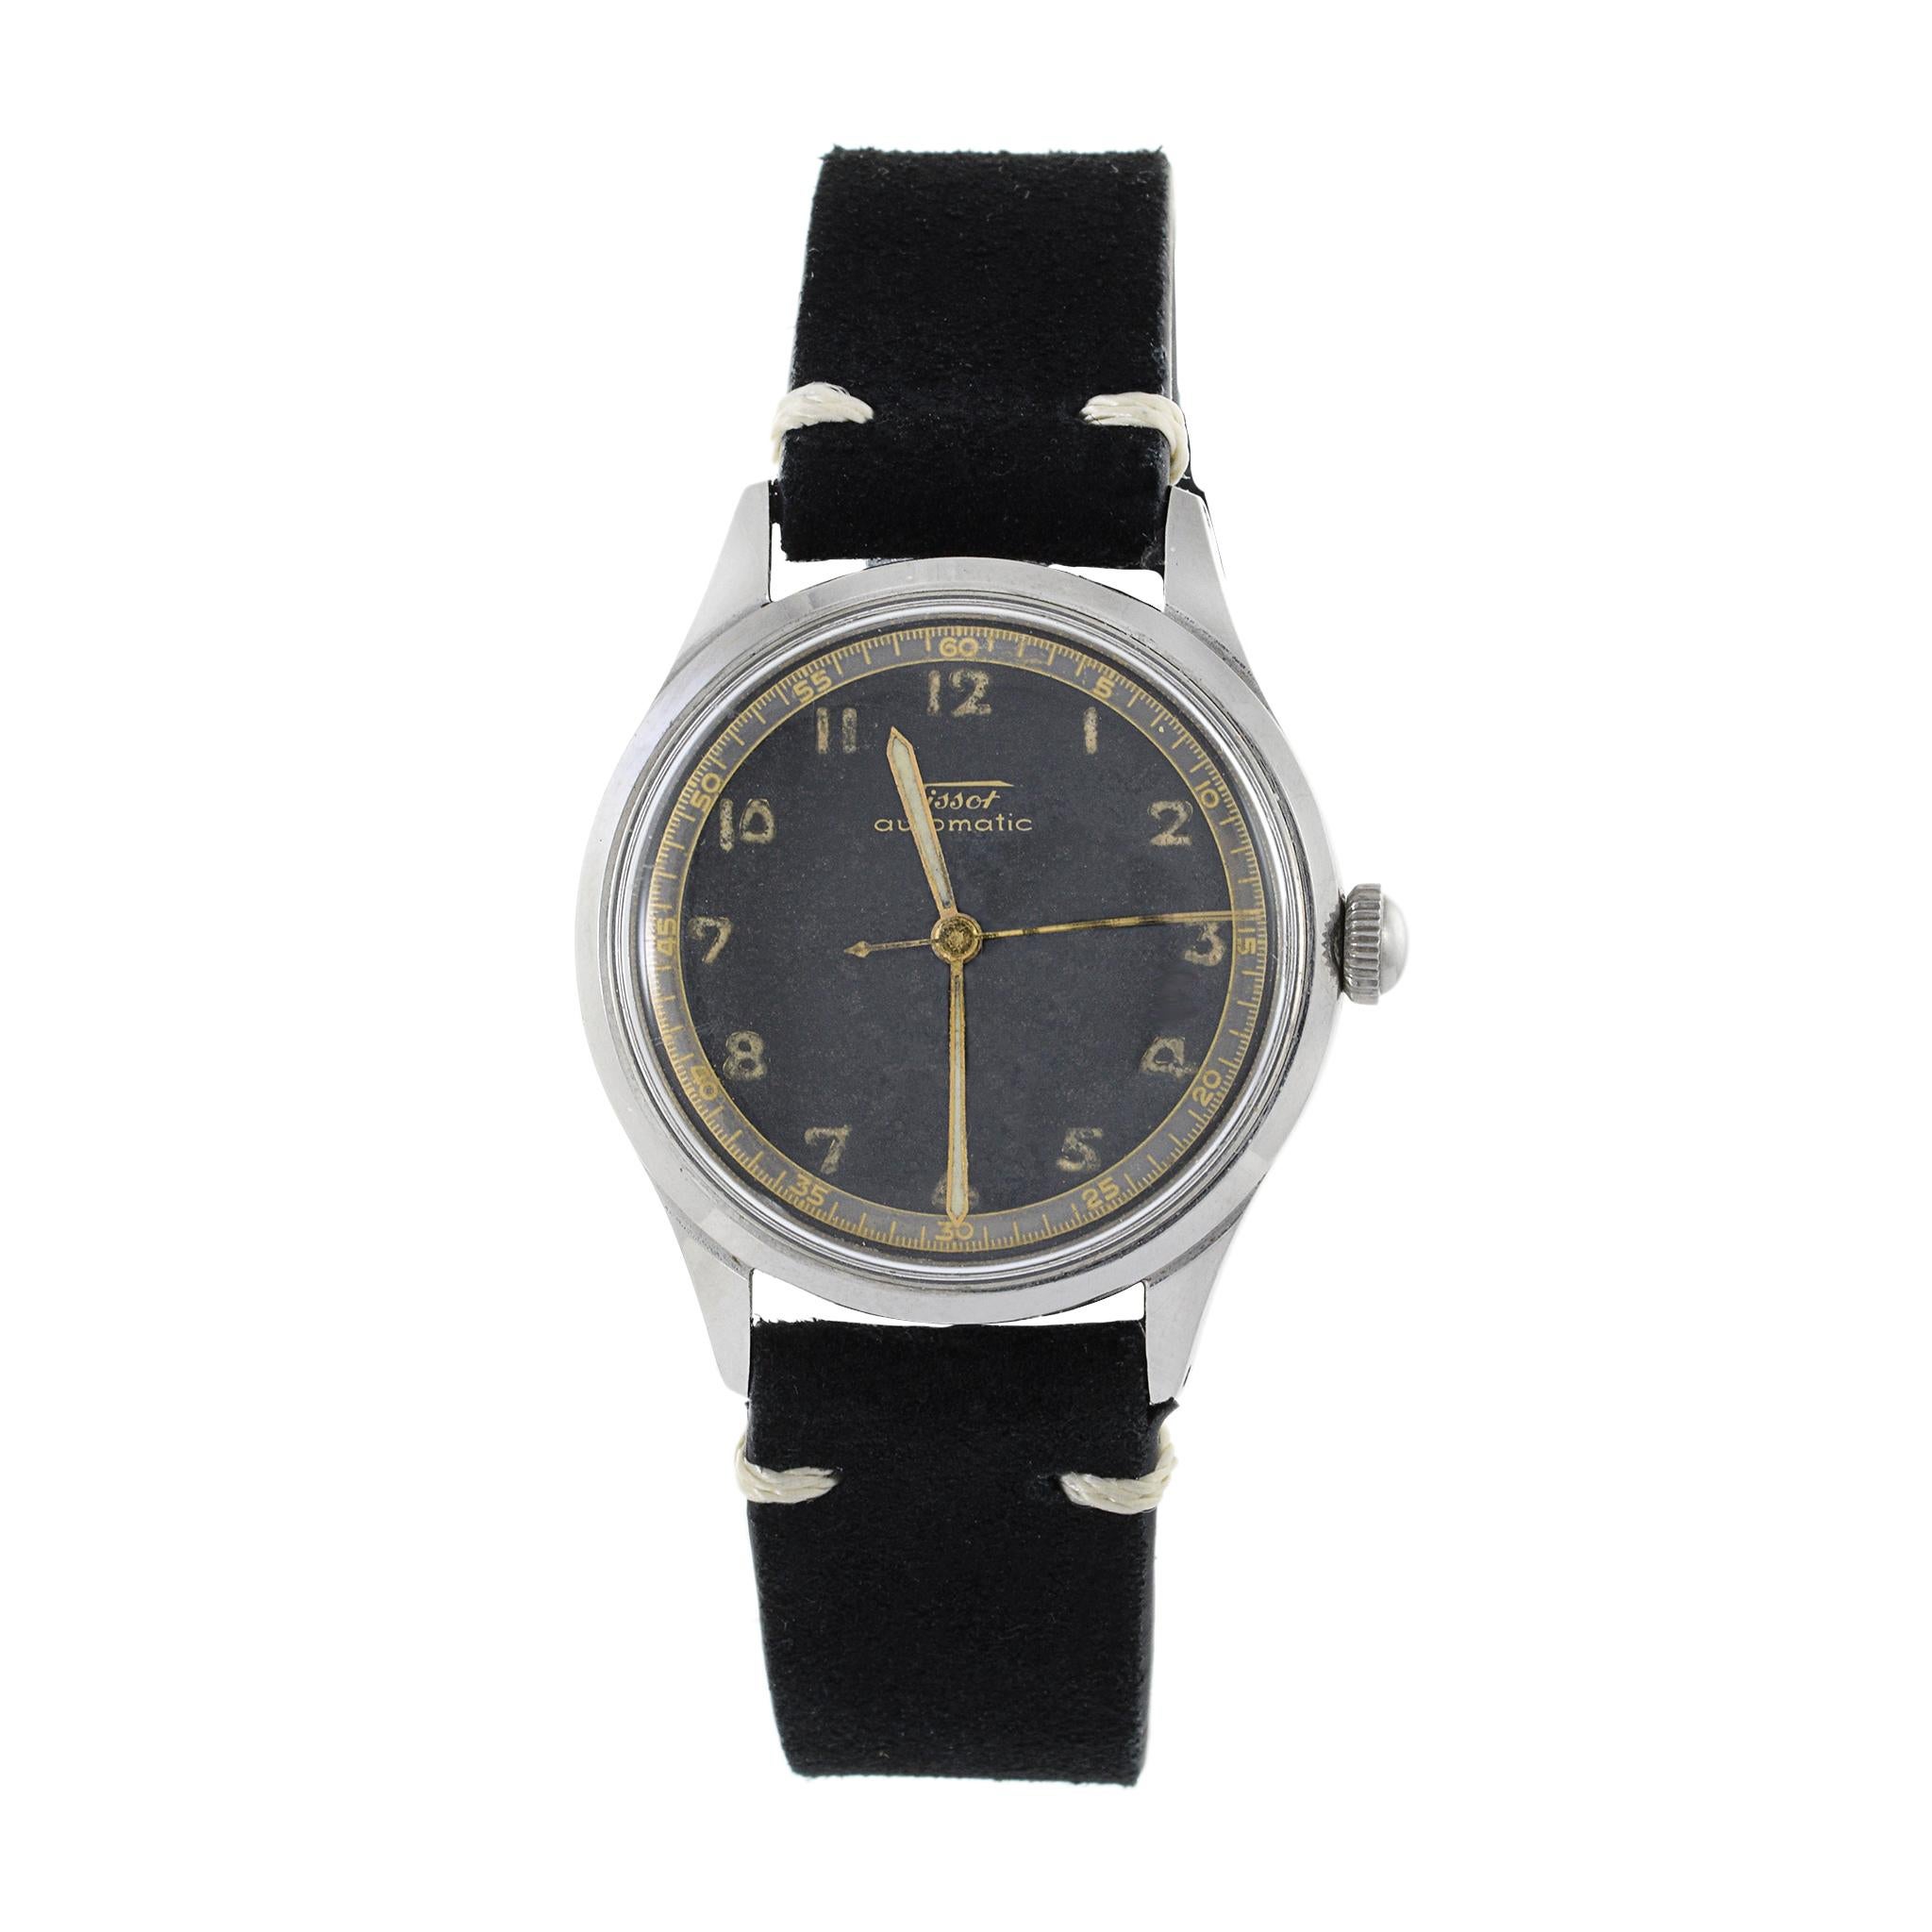 This is a rare 1940's Tissot military style calatrava with an in house bumper automatic movement. It is a reference 6541-1.

The collectibility of this watch is driven by its original dial and unpolished case. It is a true collector piece.

The